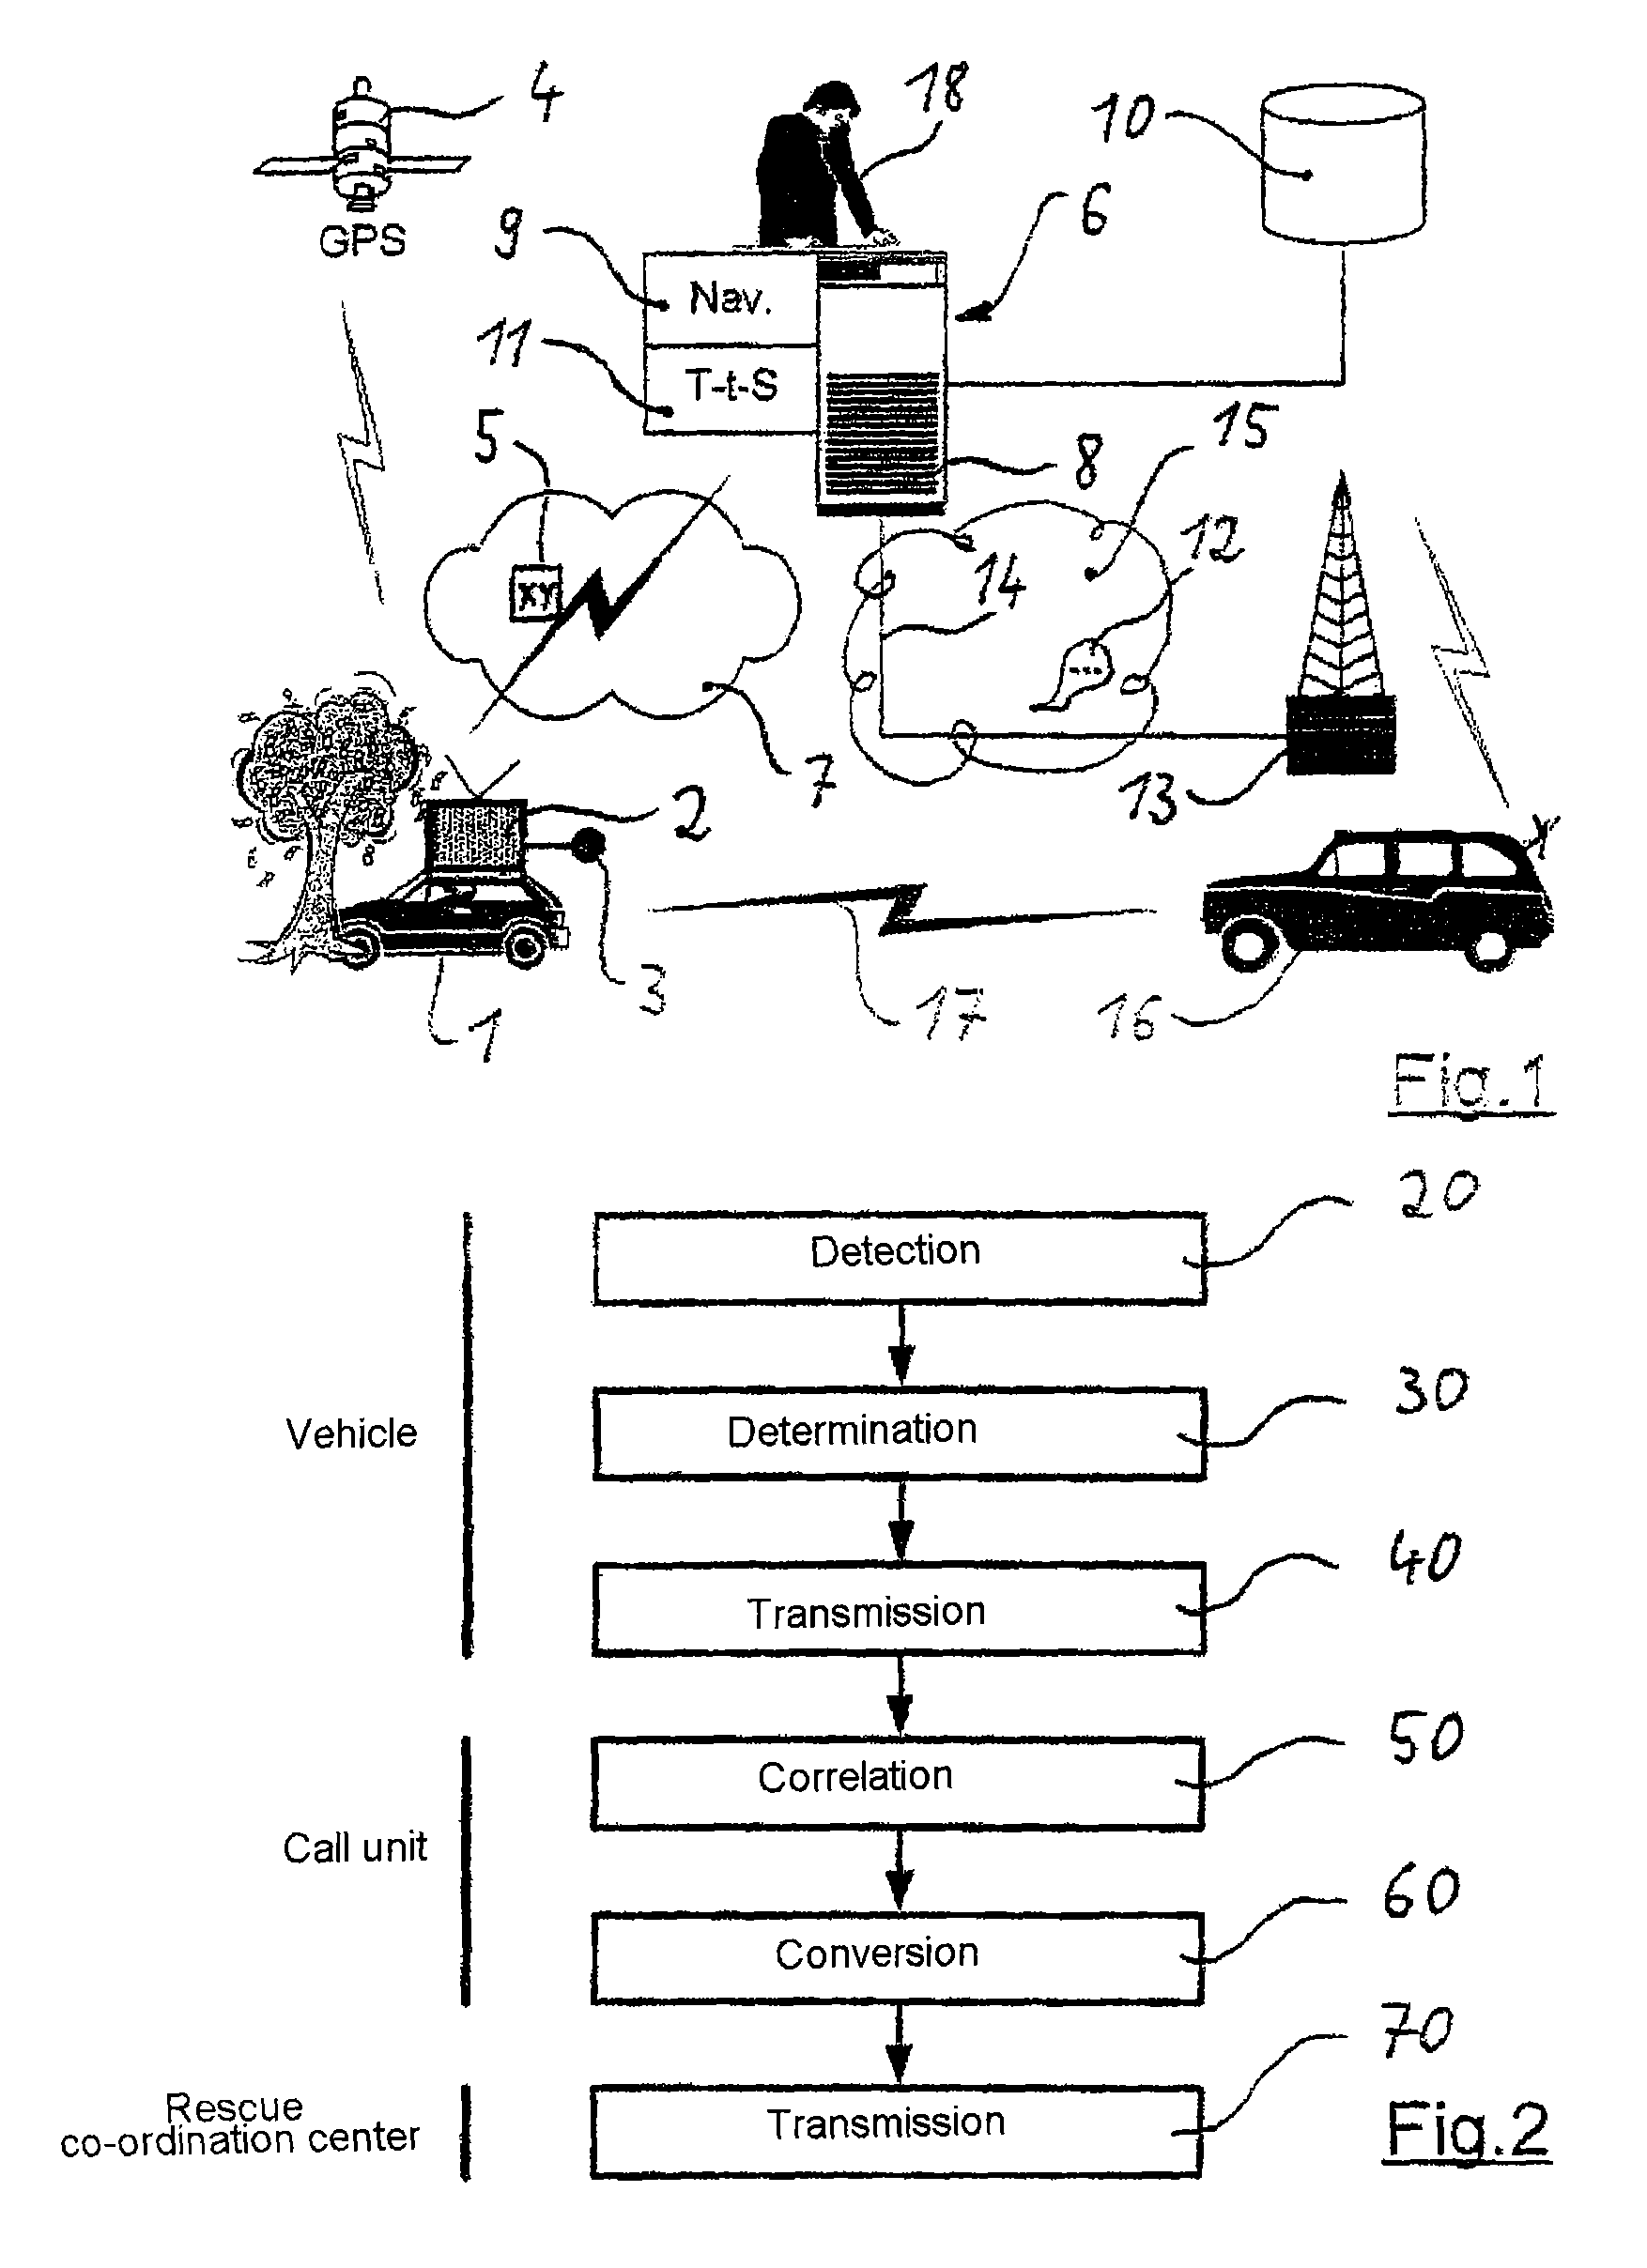 Method and system for placing an emergency call